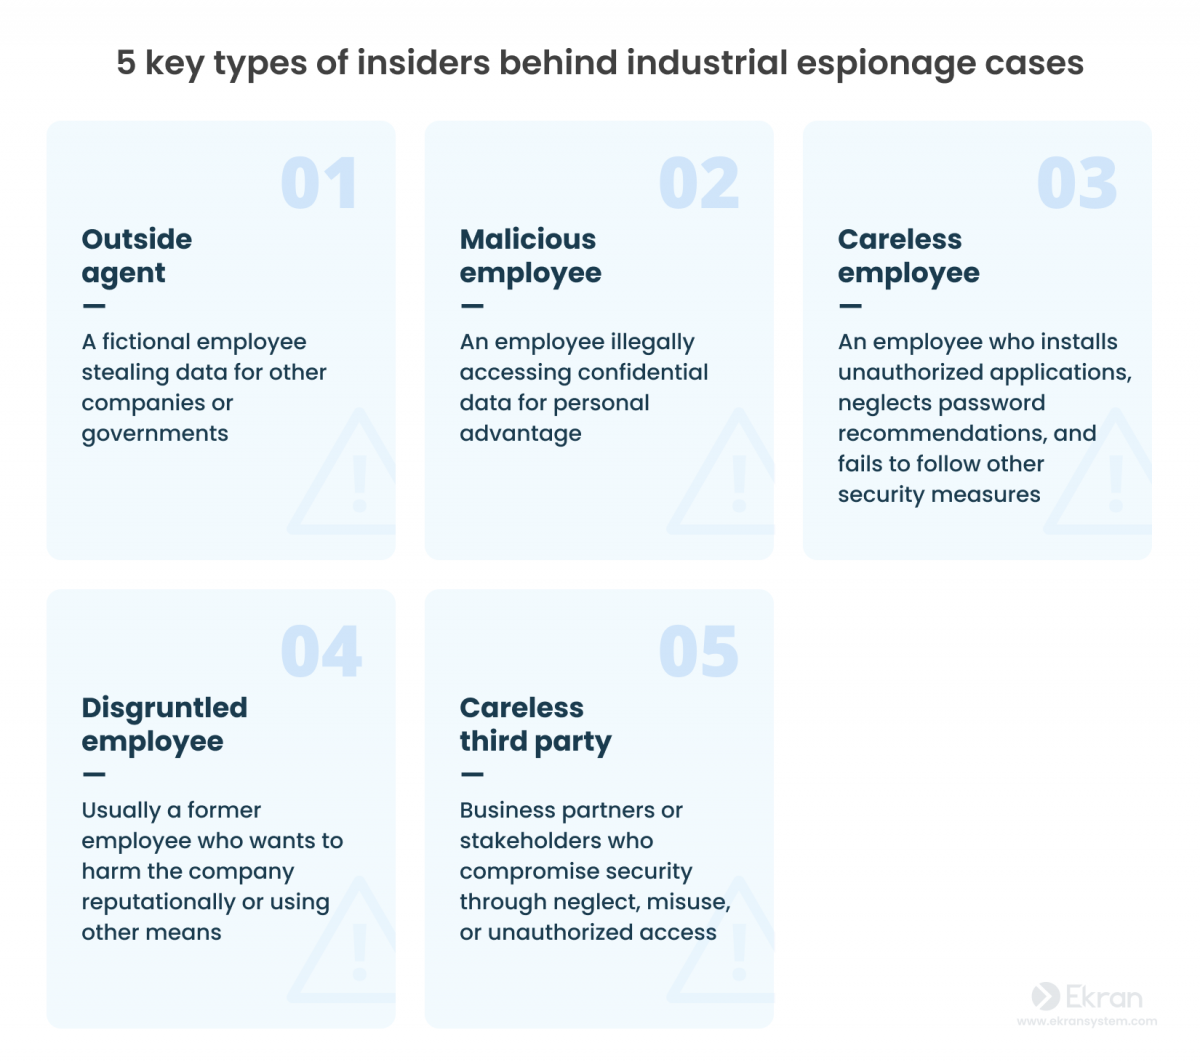 5 key types of insiders behind industrial espionage cases